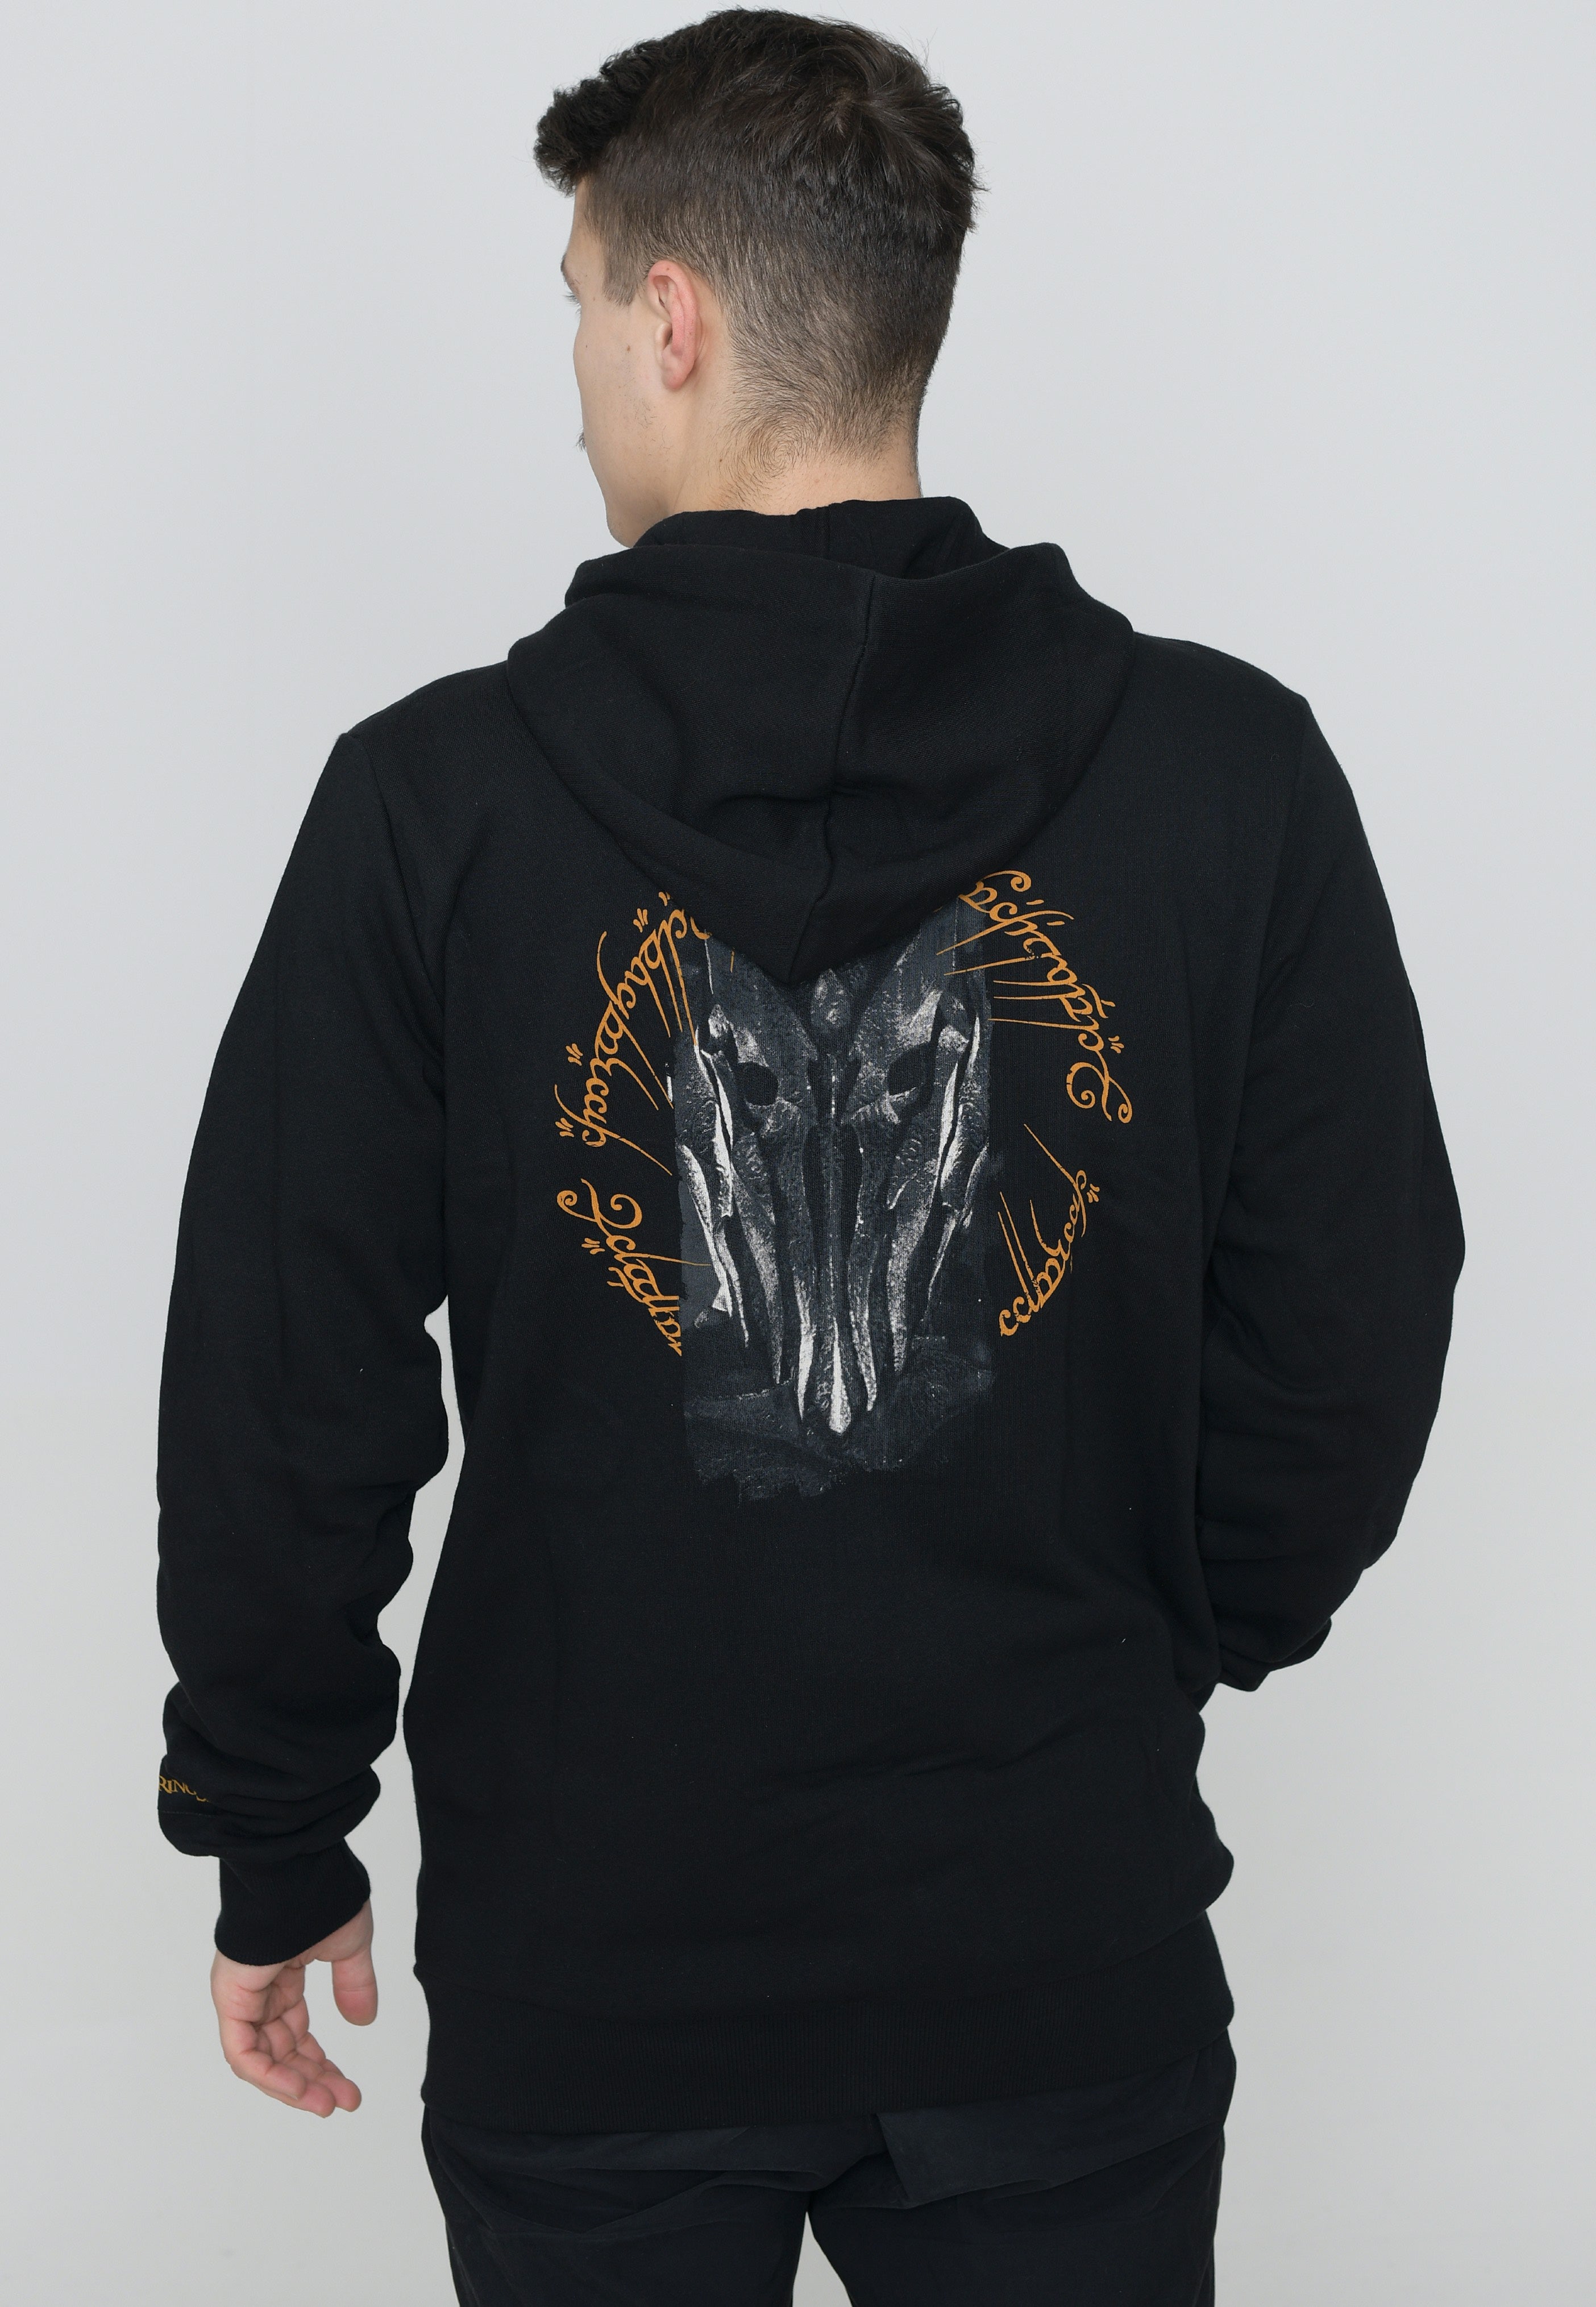 The Lord Of The Rings - Sauron - Zipper | Men-Image